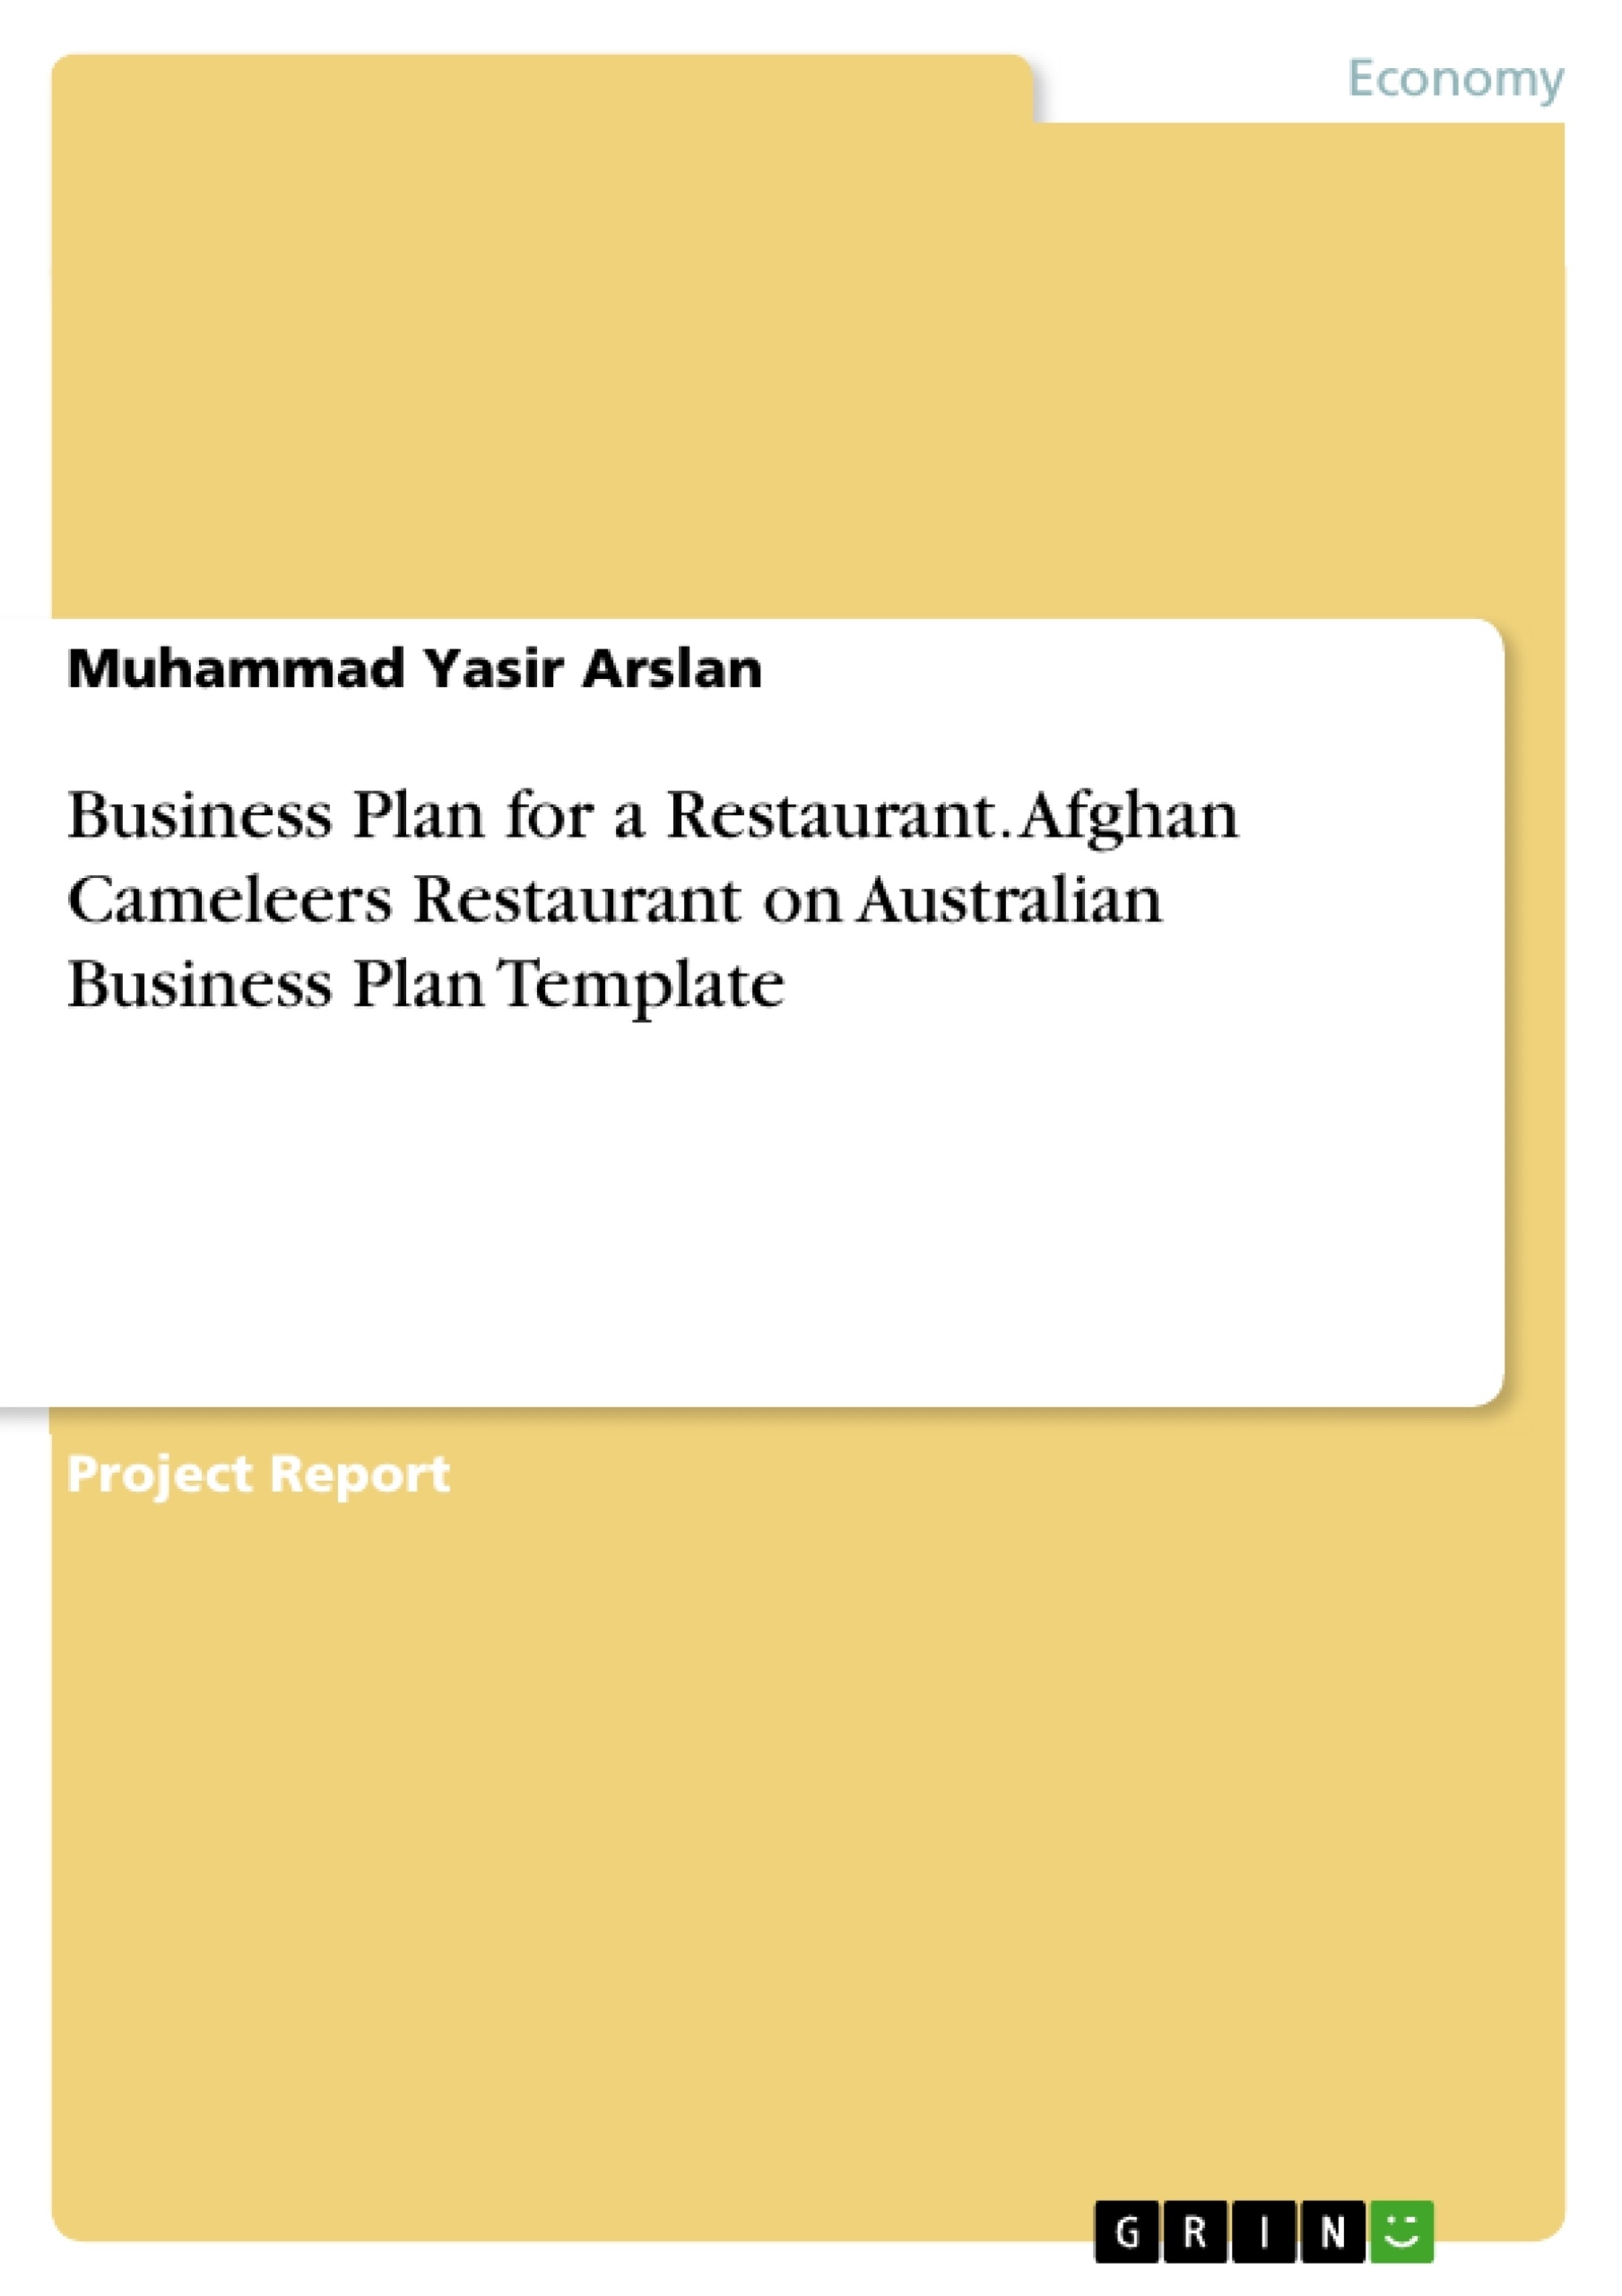 Title: Business Plan for a Restaurant. Afghan Cameleers Restaurant on Australian Business Plan Template